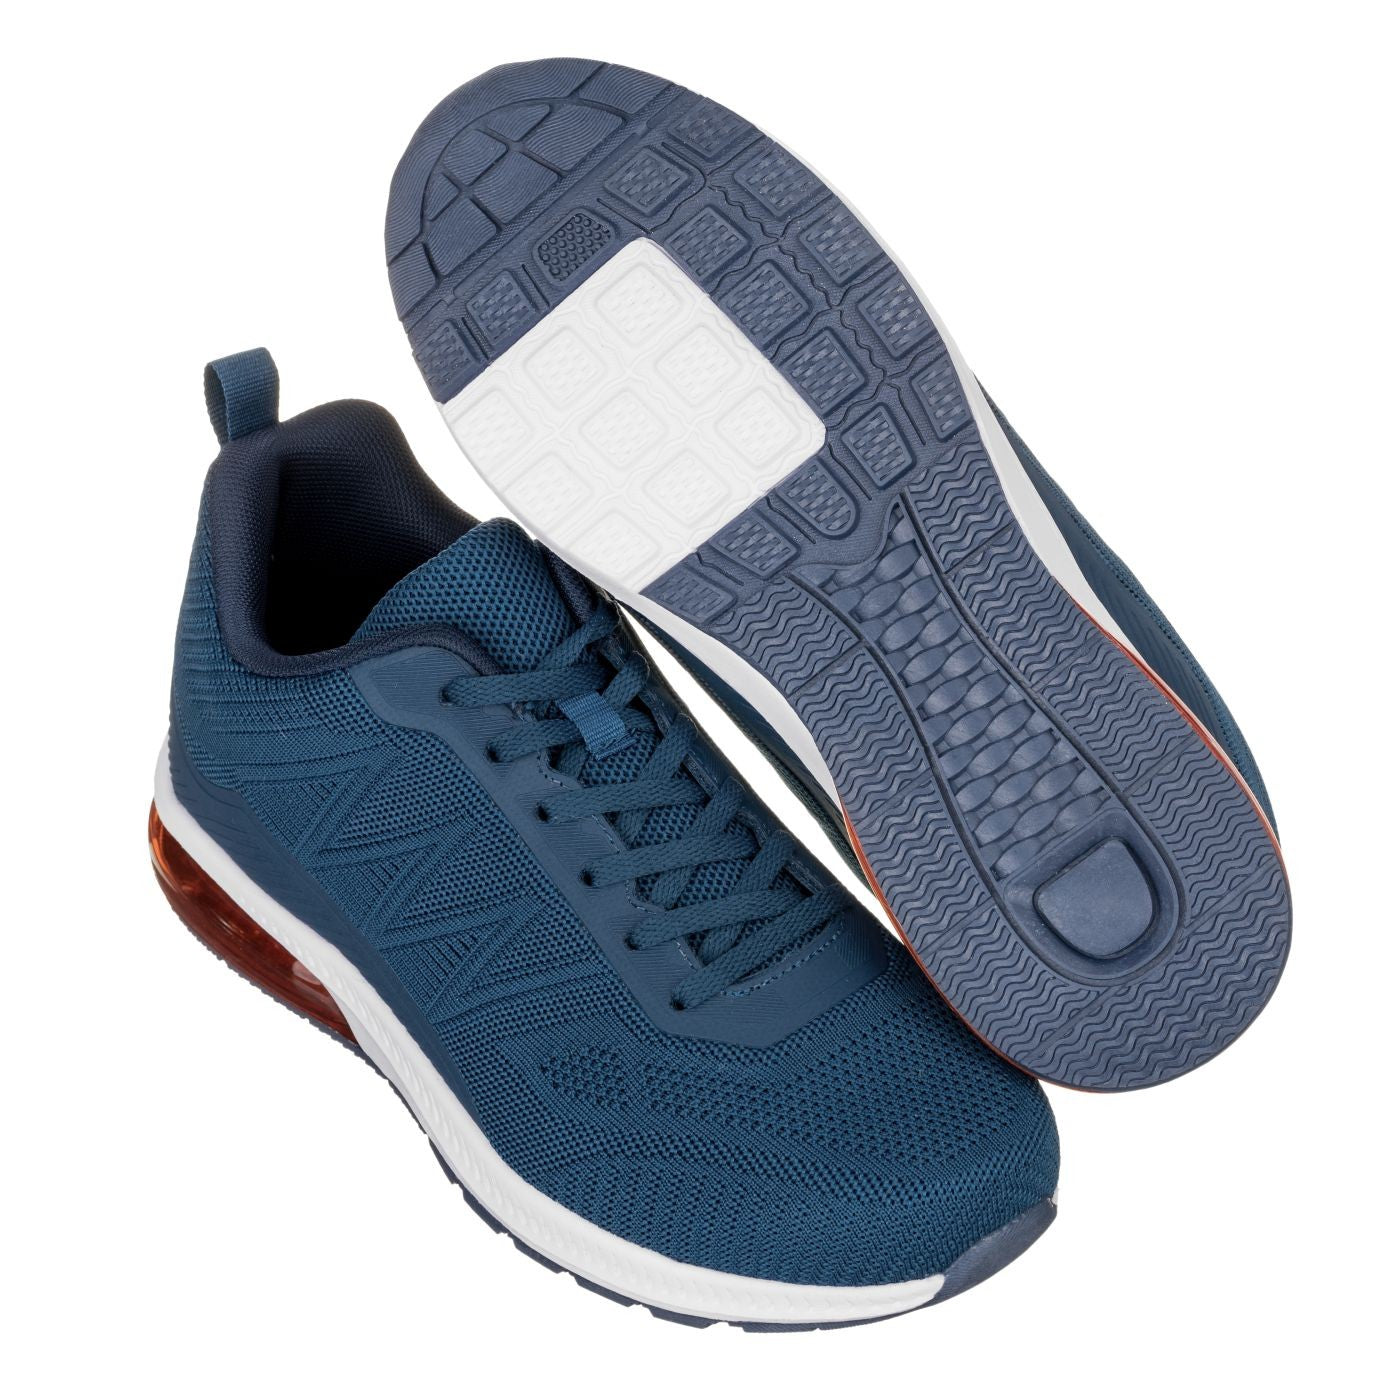 Elevator shoes height increase CALTO - Q230 - 2.4 Inches Taller (Navy/Red) - Super Lightweight